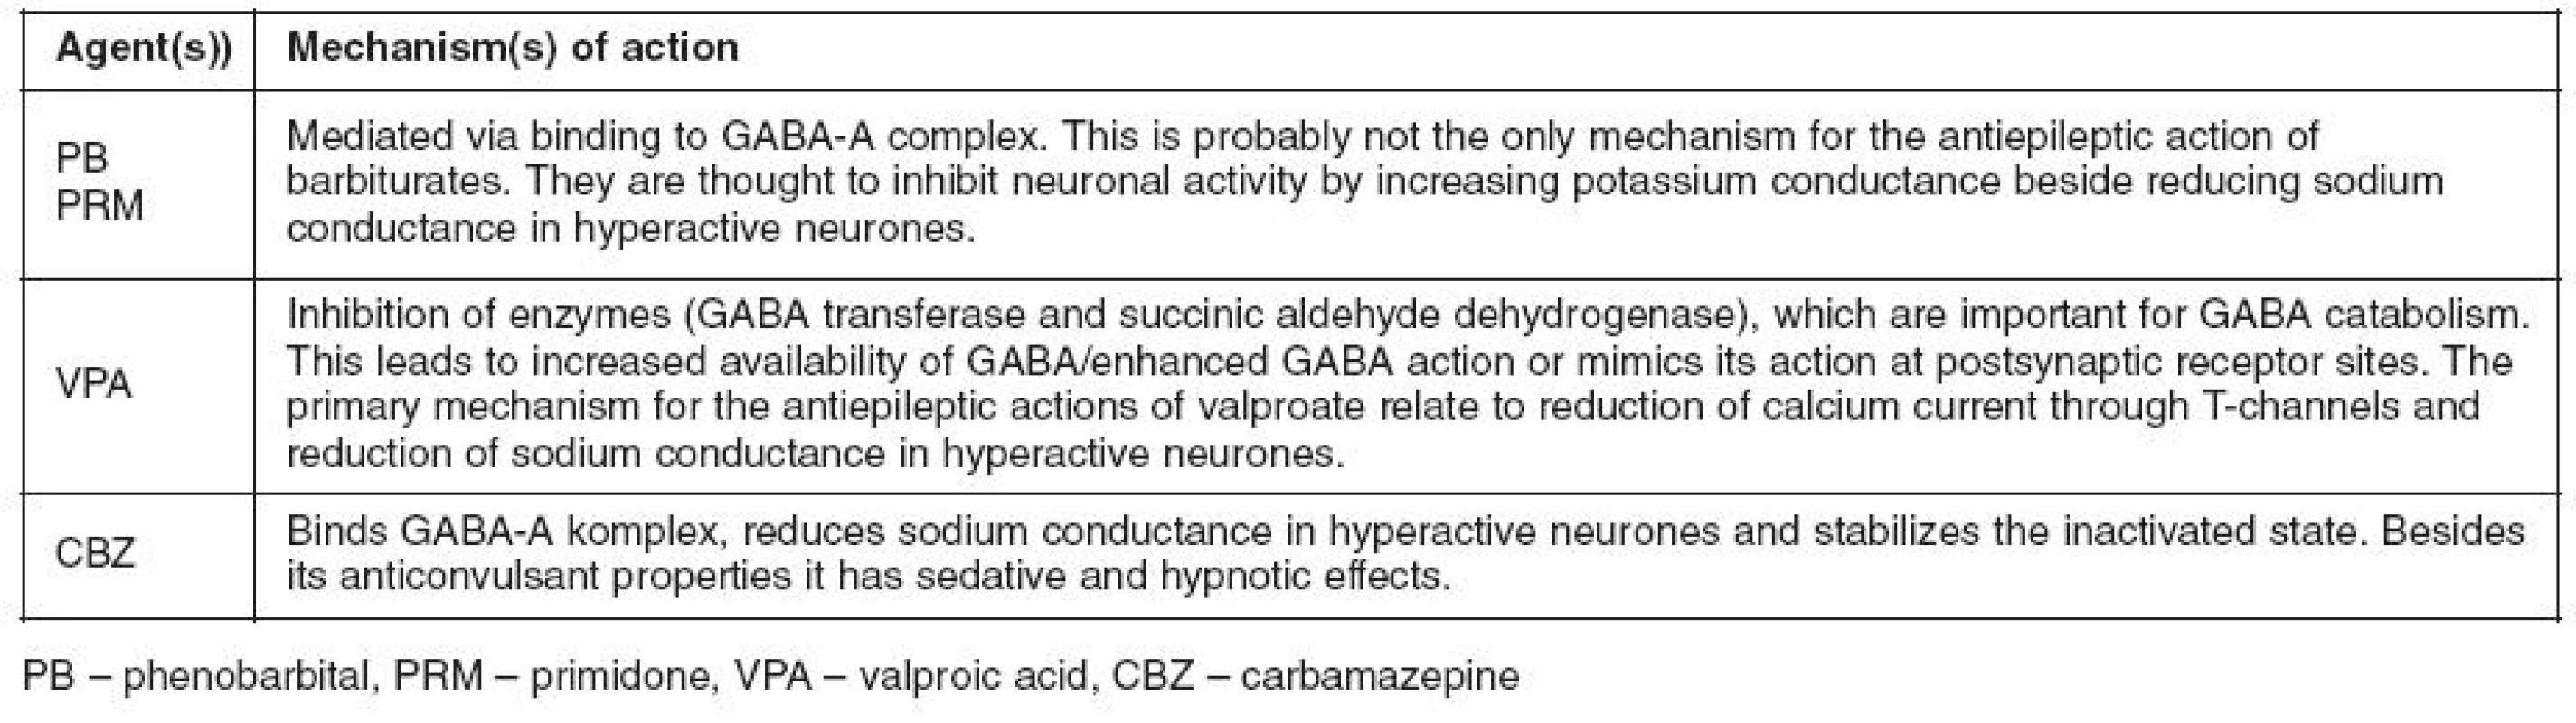 Mechanisms of action of antiepileptic drugs (AEDs) used concomitantly in the present case report and consideration of synergism in terms of pharmacodynamics. As illustrated all the three drugs act by inflencing the gamma aminobutyric acid (GABA) system